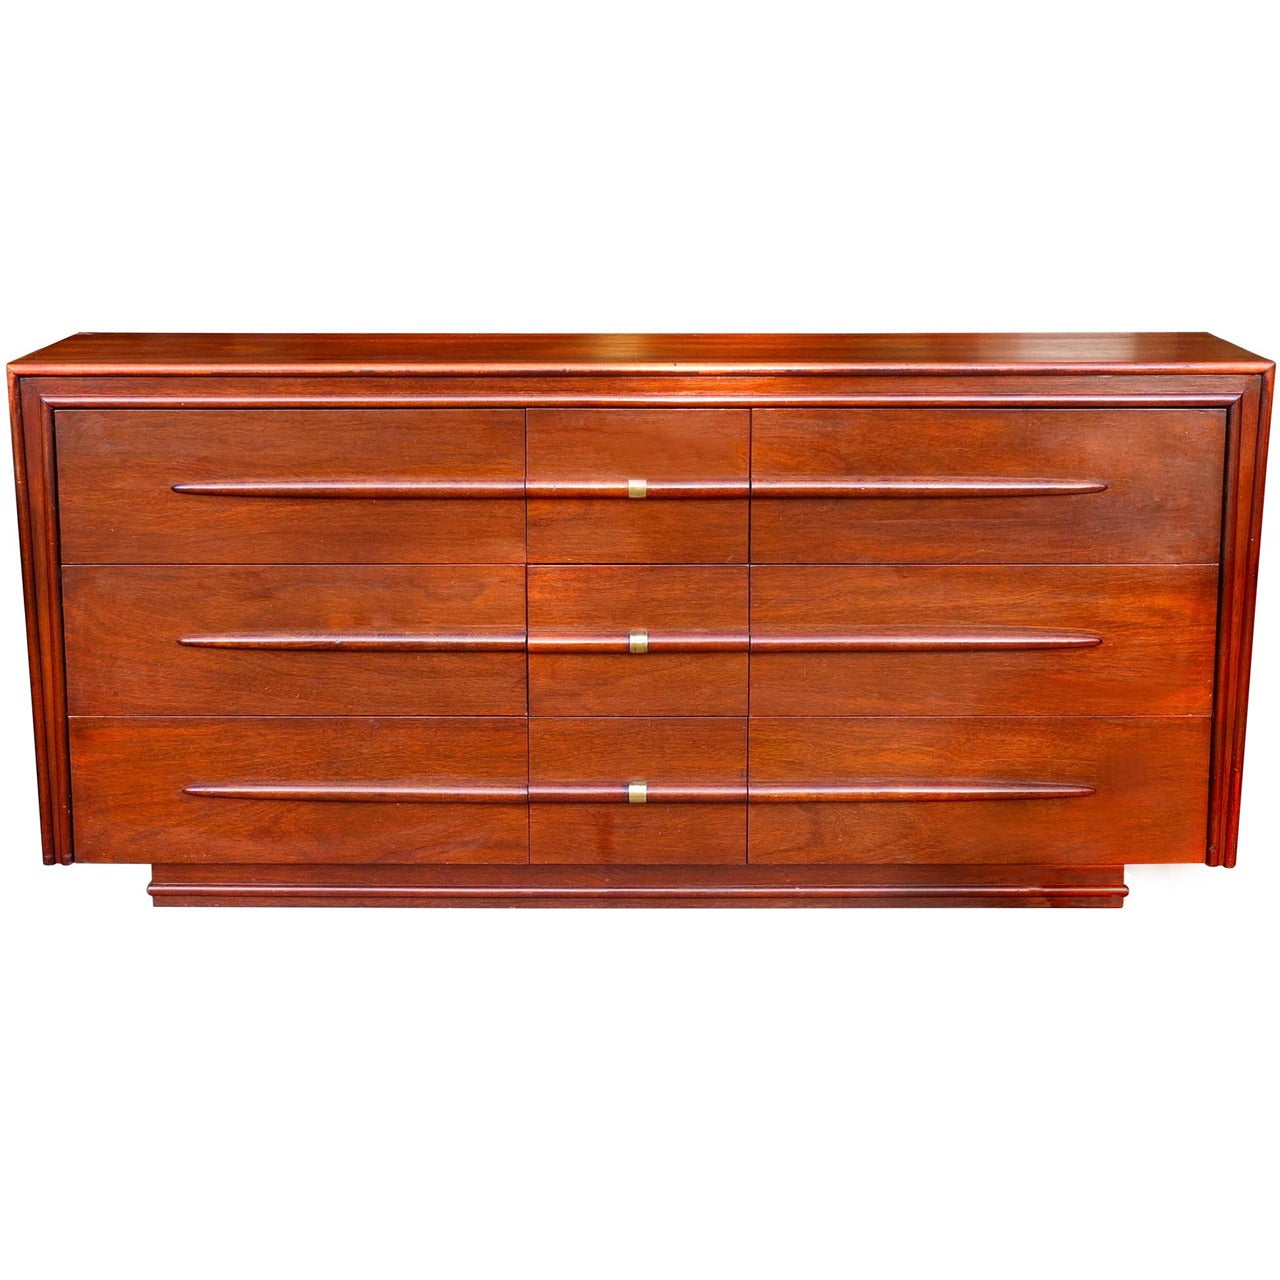 "Viscount" Mahogany Dresser by Wesley Griffin for Gibbard